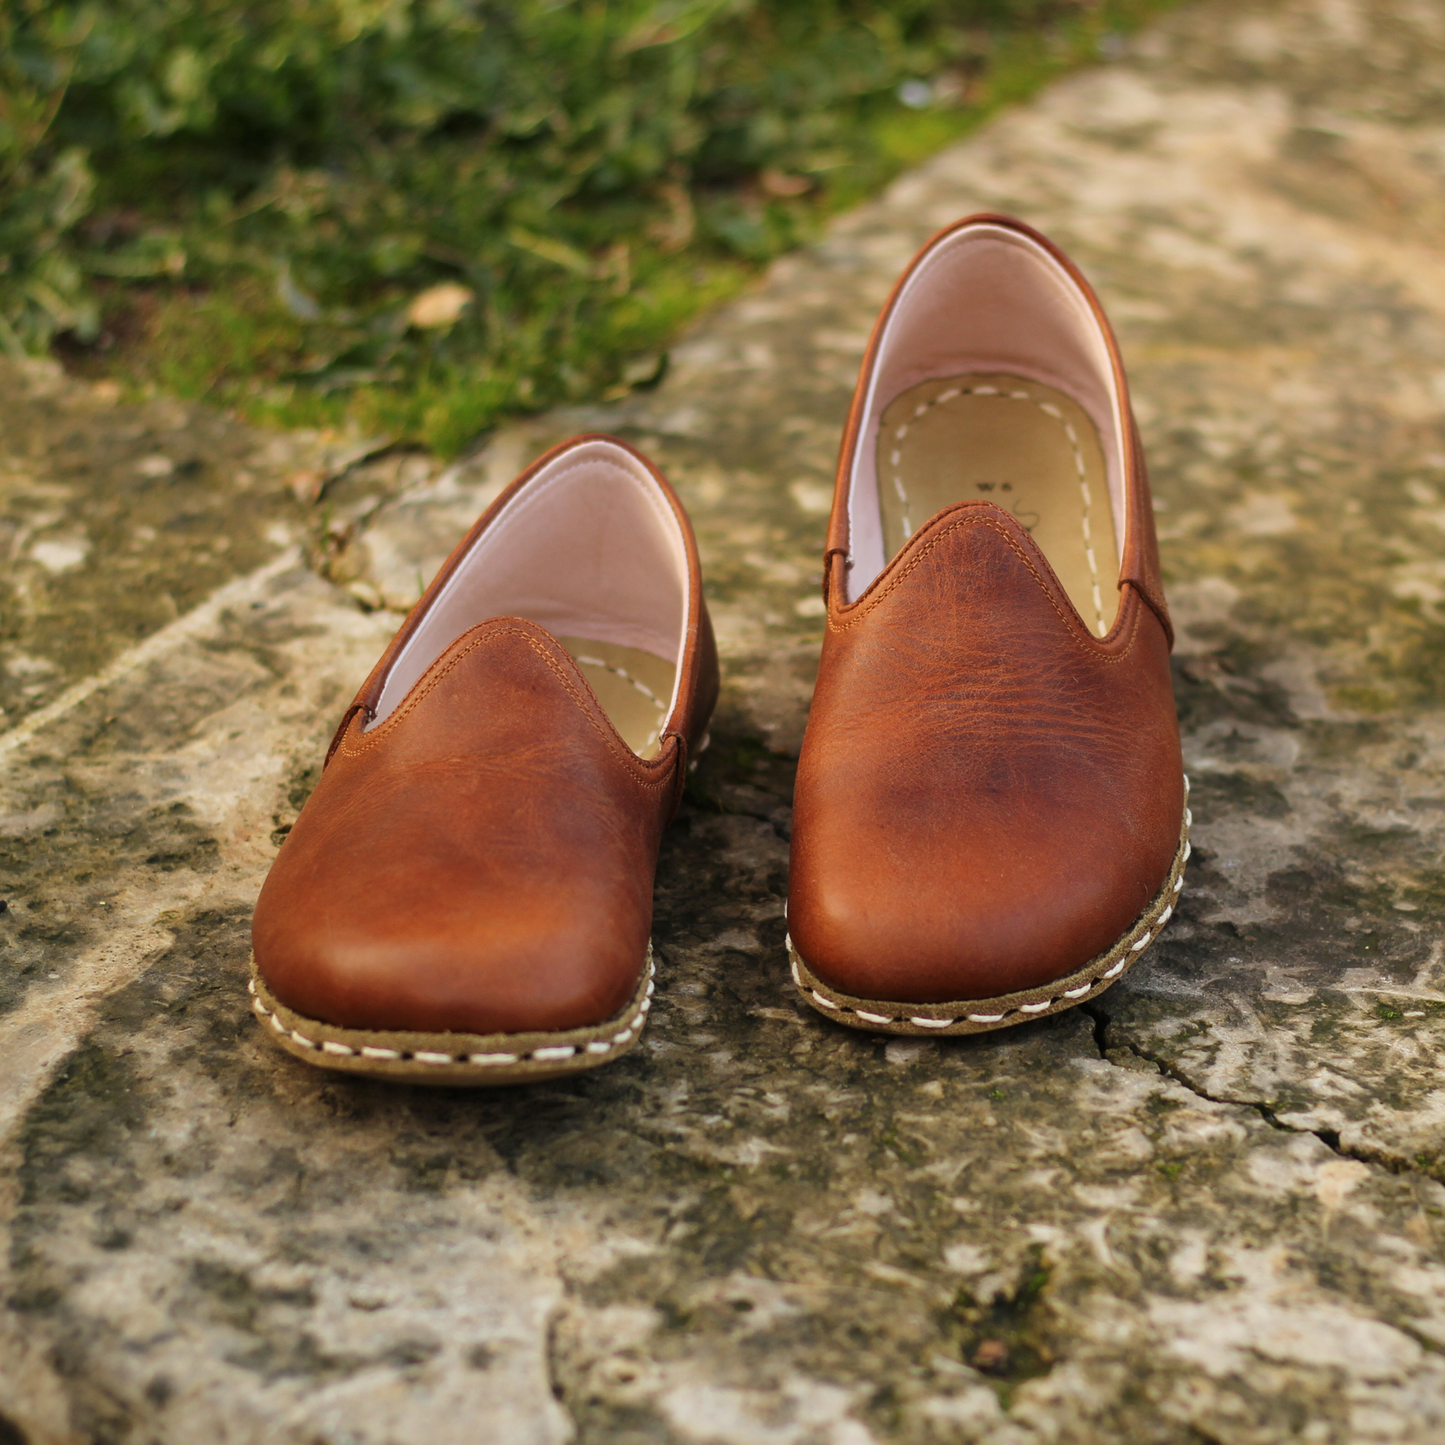 Handmade Turkish Yemeni Shoes in New Crazy Brown Leather with Wide Front